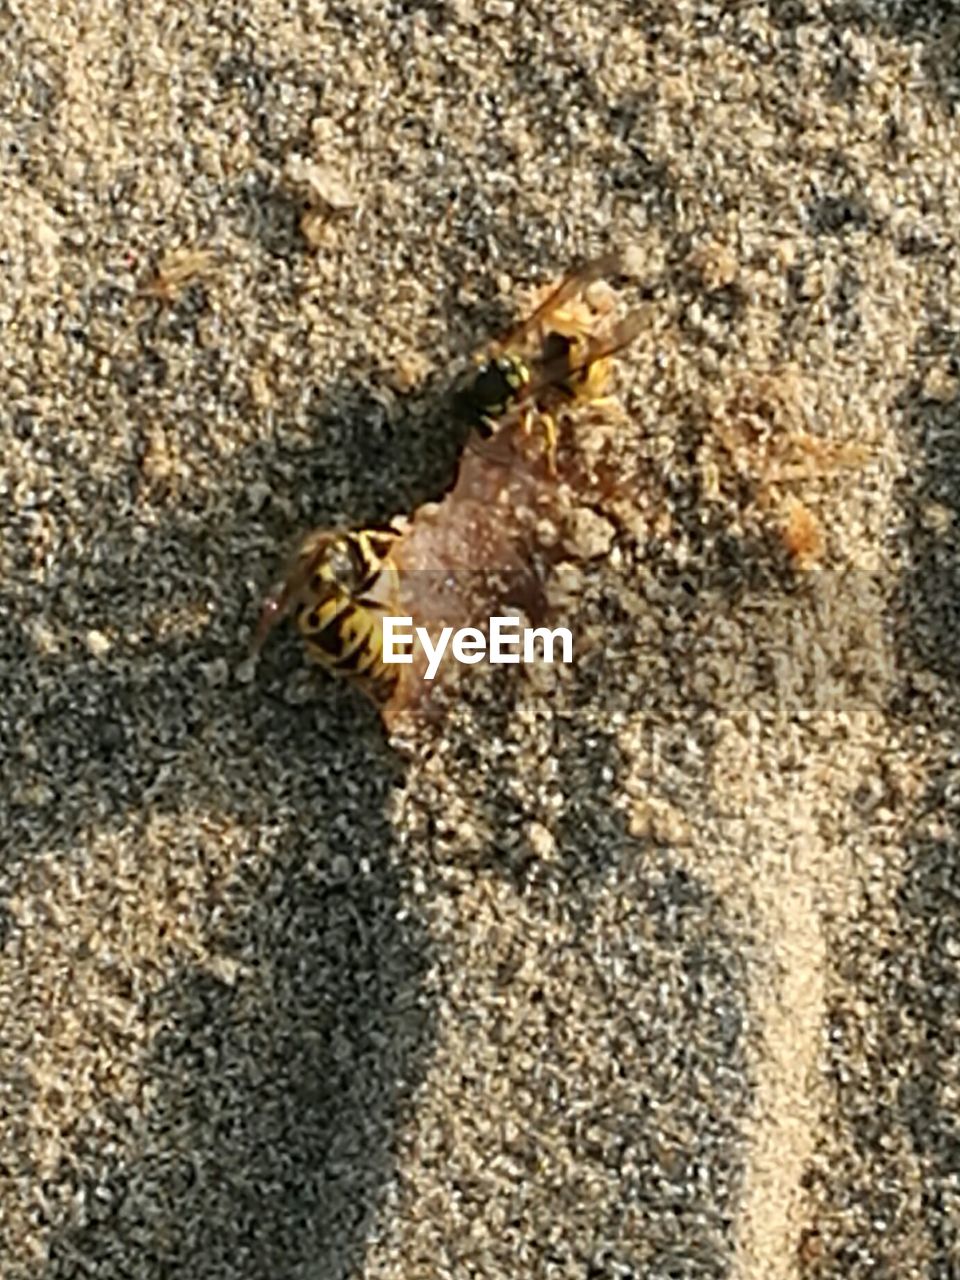 CLOSE-UP OF HONEY BEE ON SAND